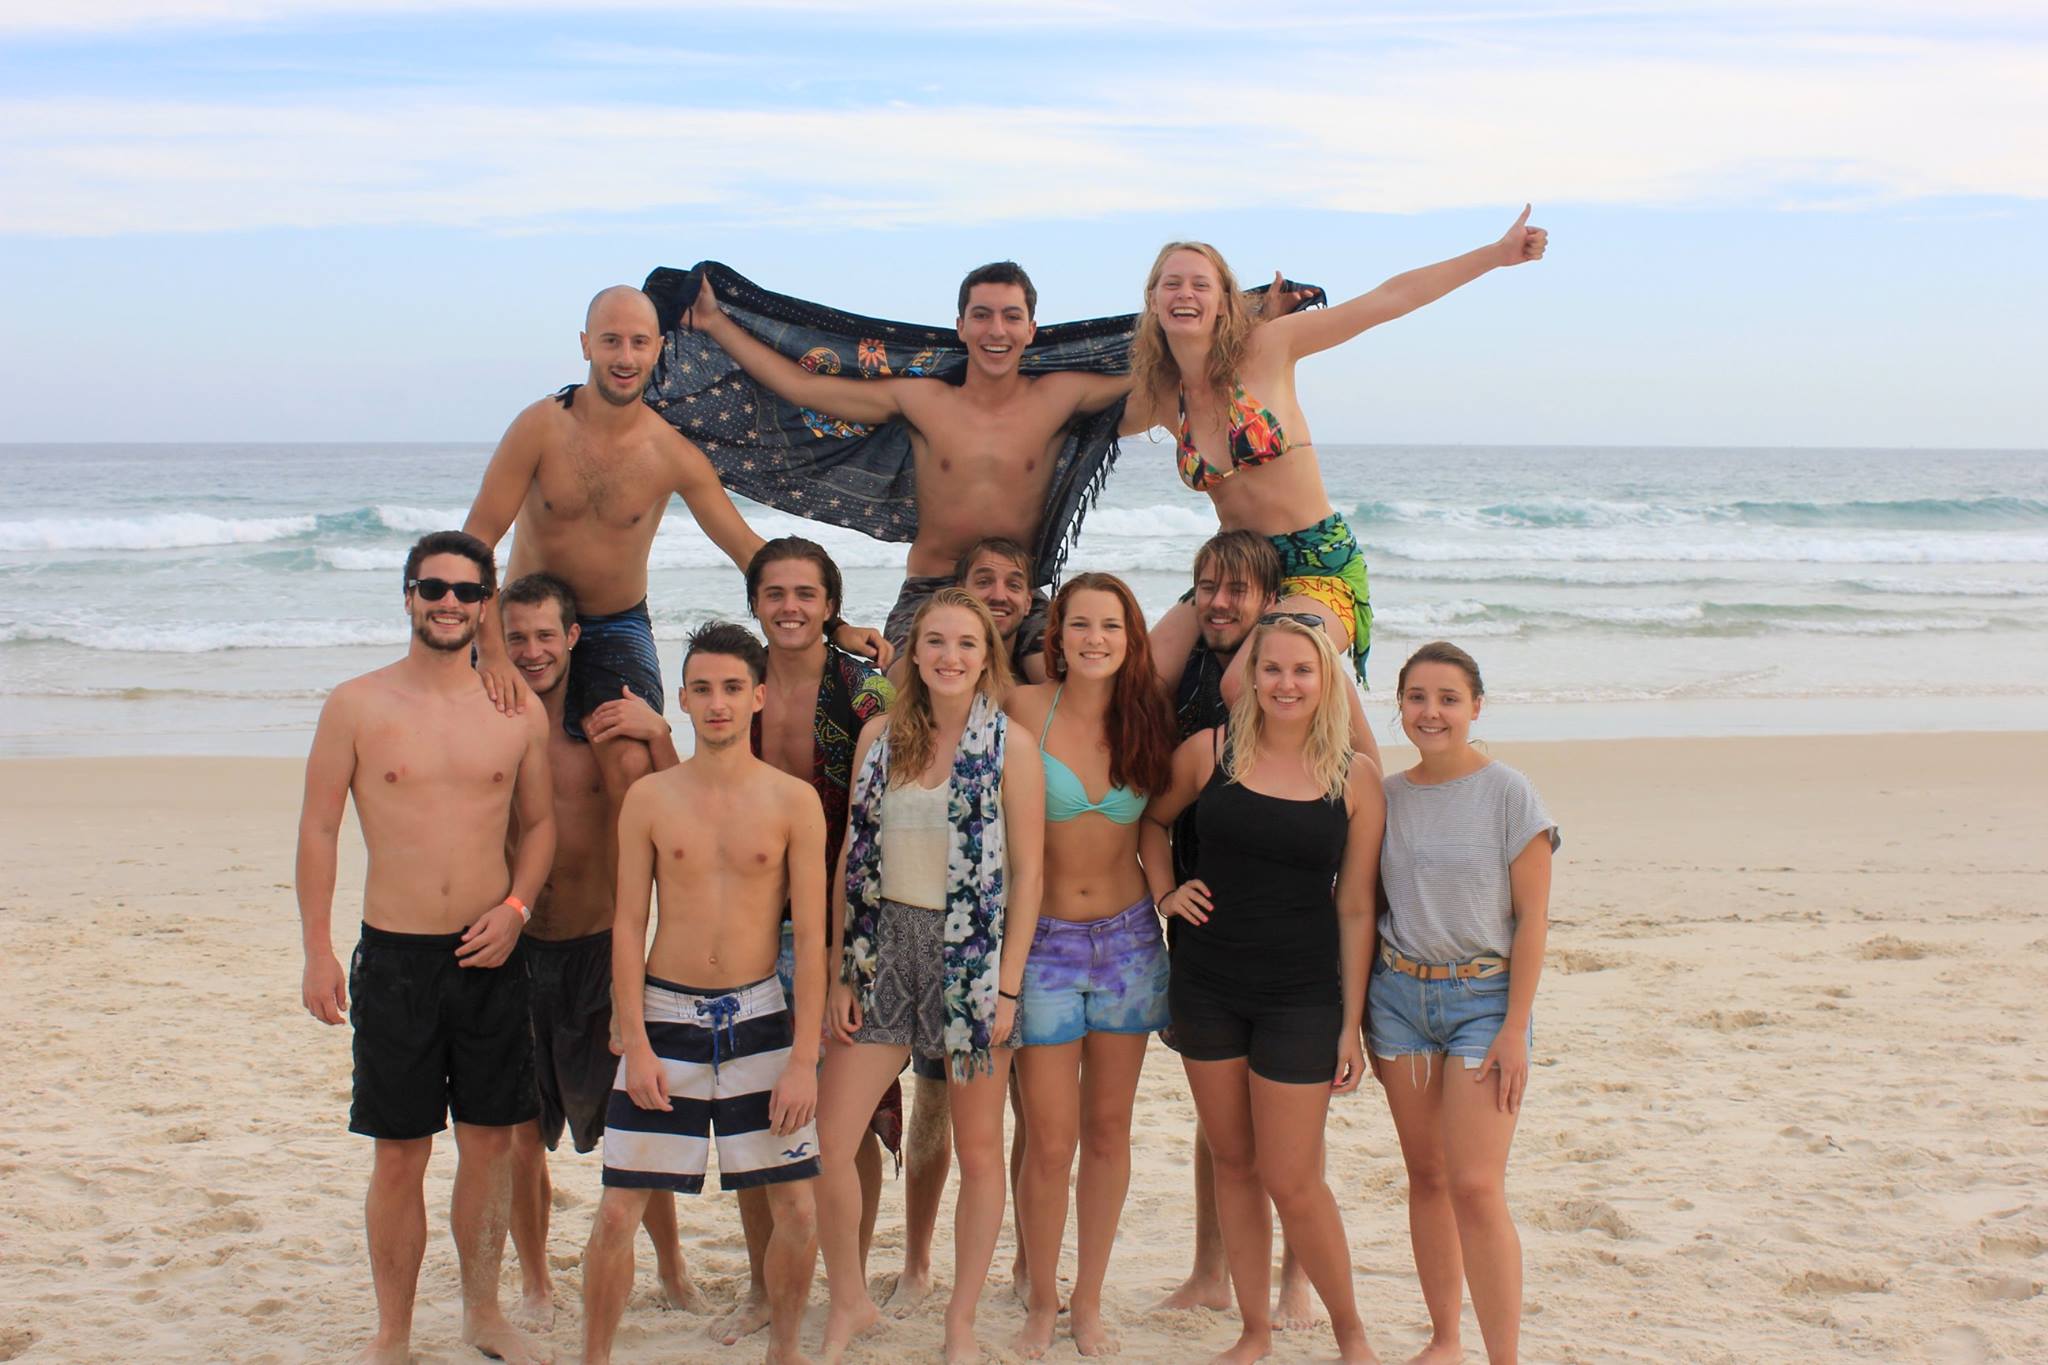 Brazil study abroad - photo story by Daniel Connell